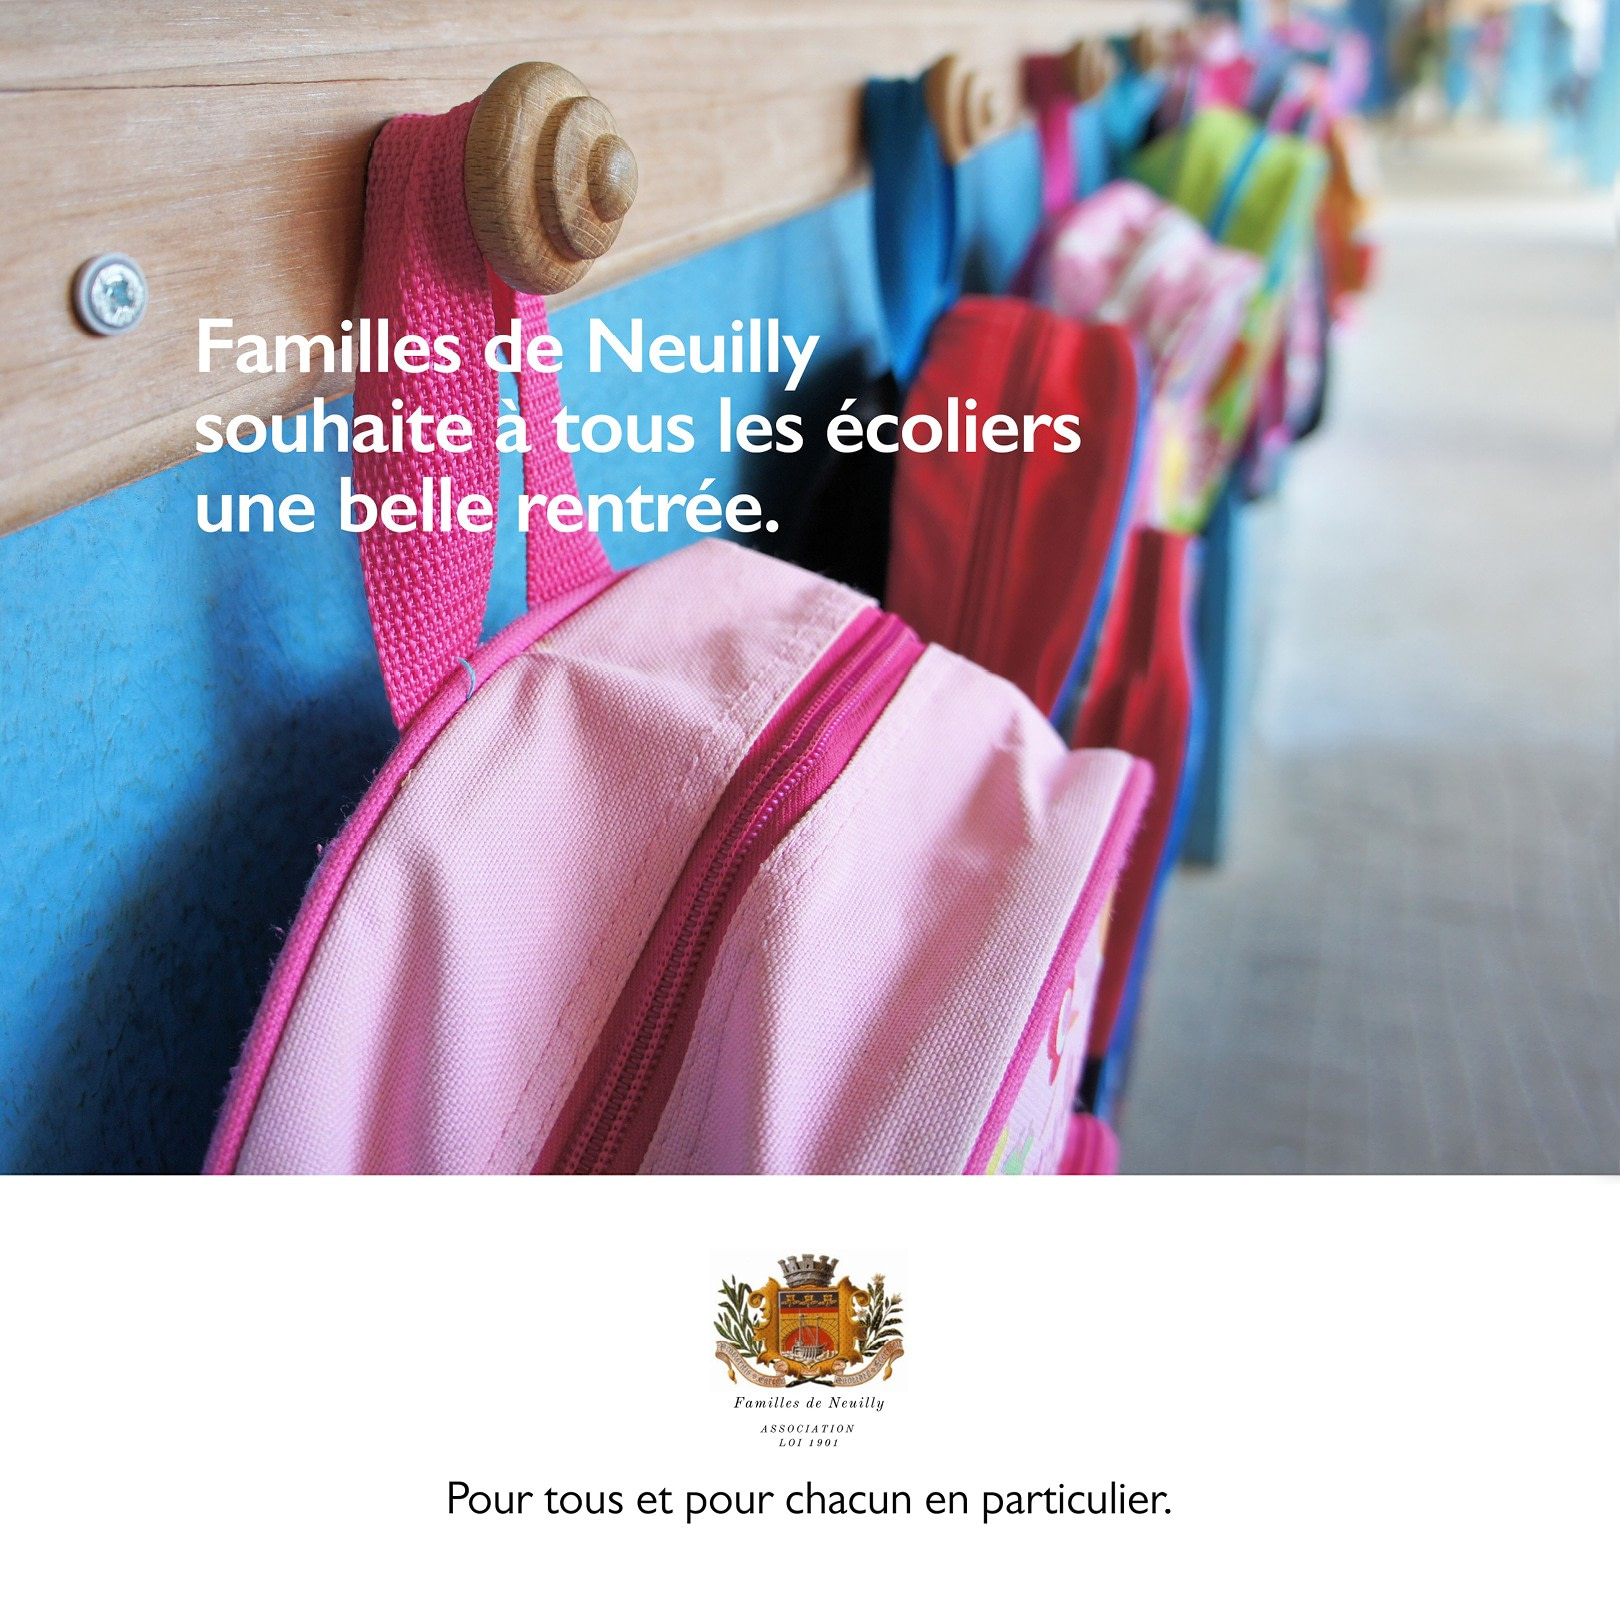 plate-ou-gazeuse-creations-familles-de-neuilly-rentree@2x